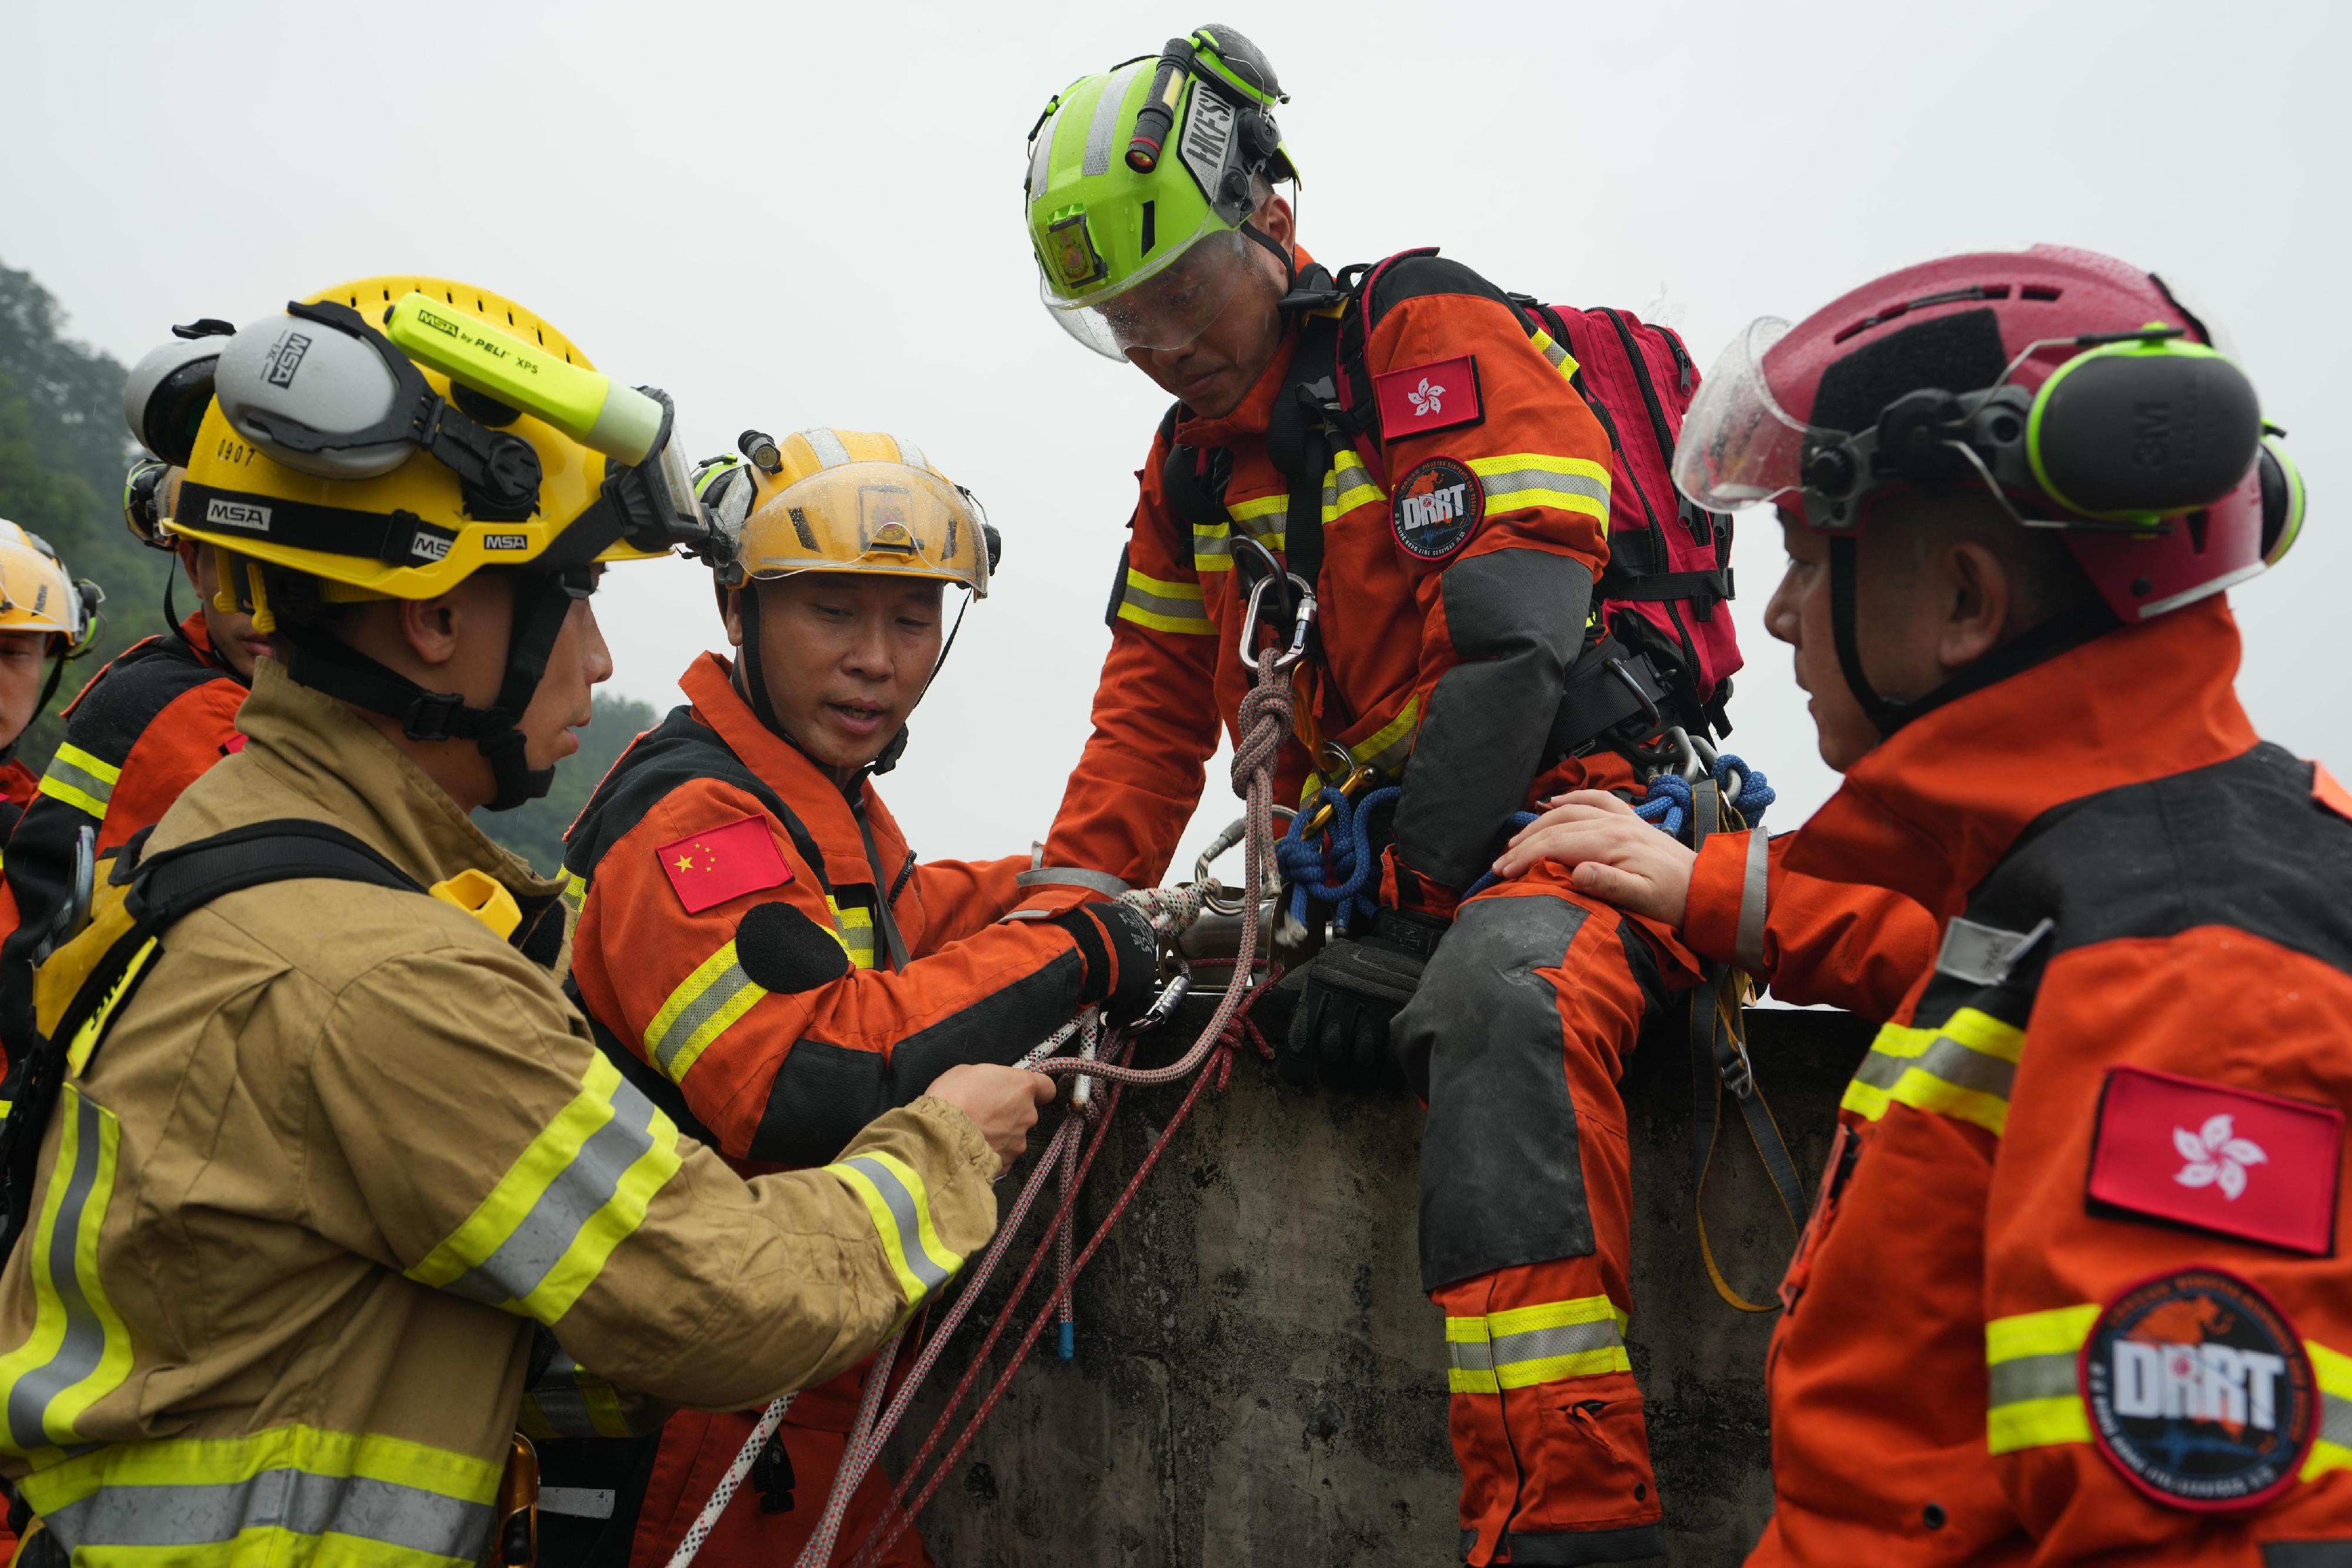 The Fire and Rescue Corps of Guangdong Province, the Hong Kong Fire Services Department and the Macao Fire Services Bureau have conducted the Guangdong-Hong Kong-Macao Greater Bay Area joint emergency response and rescue exercise "Liancheng-2024" in Jiangmen, Guangdong Province from May 27 to today (May 29). Photo shows rescue teams from Hong Kong and Macao working together to set up a rope system for rescue operations.